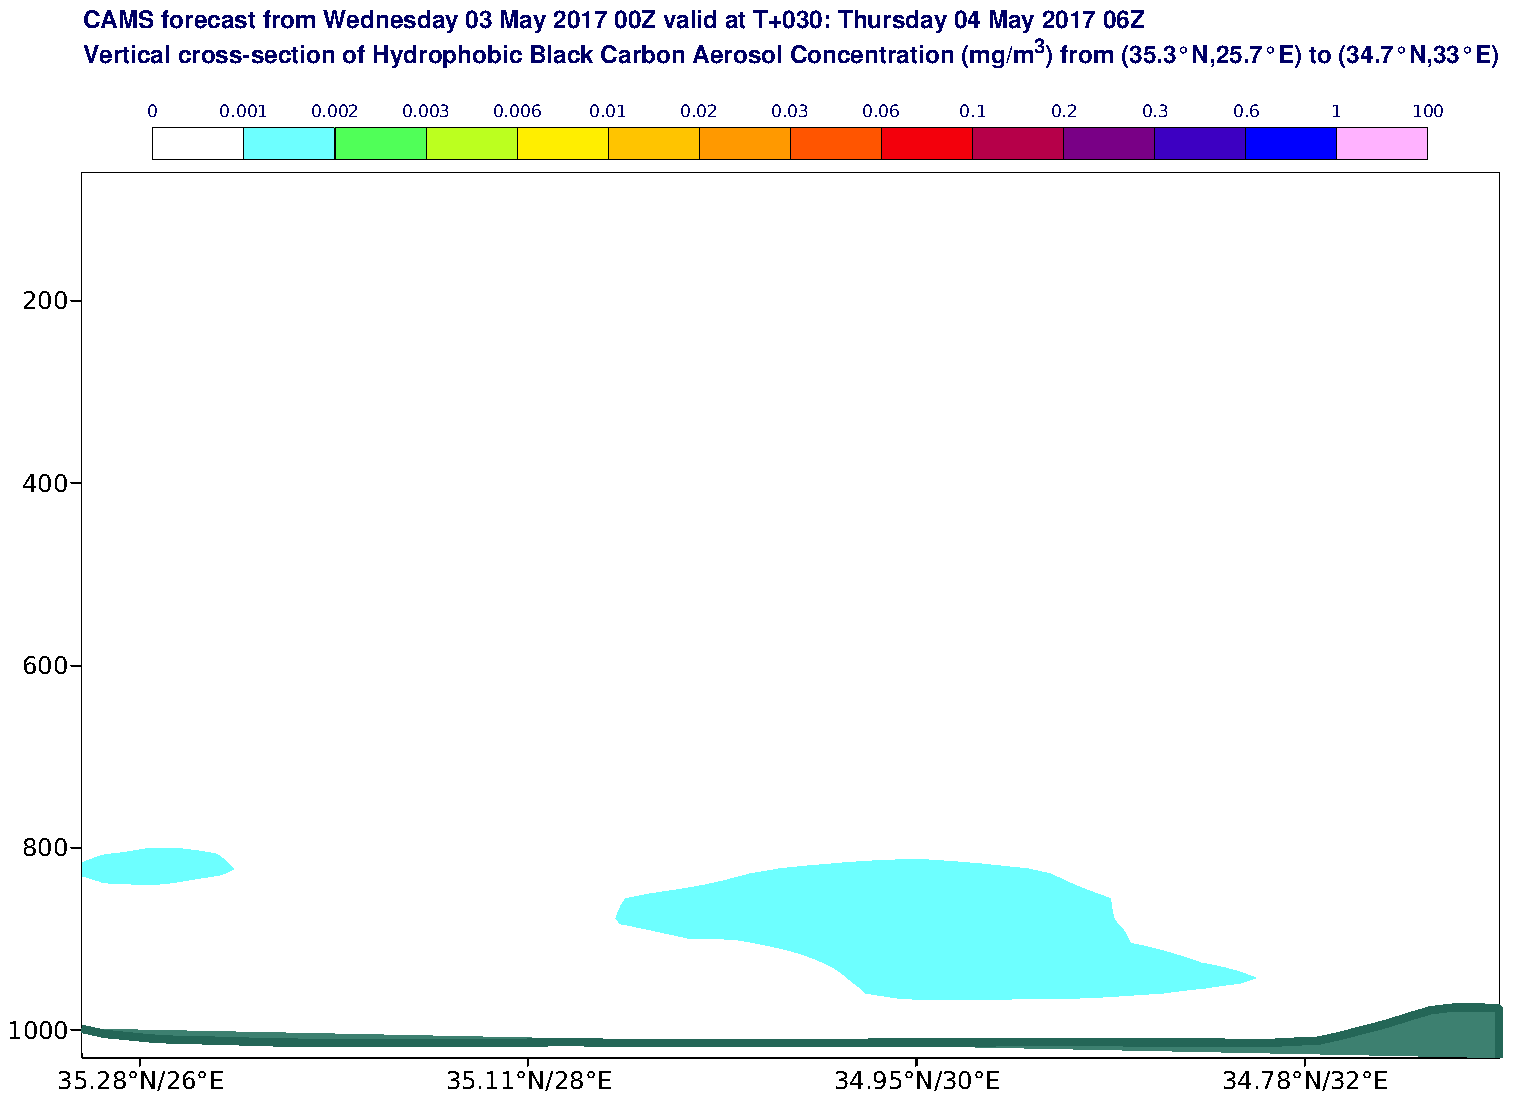 Vertical cross-section of Hydrophobic Black Carbon Aerosol Concentration (mg/m3) valid at T30 - 2017-05-04 06:00